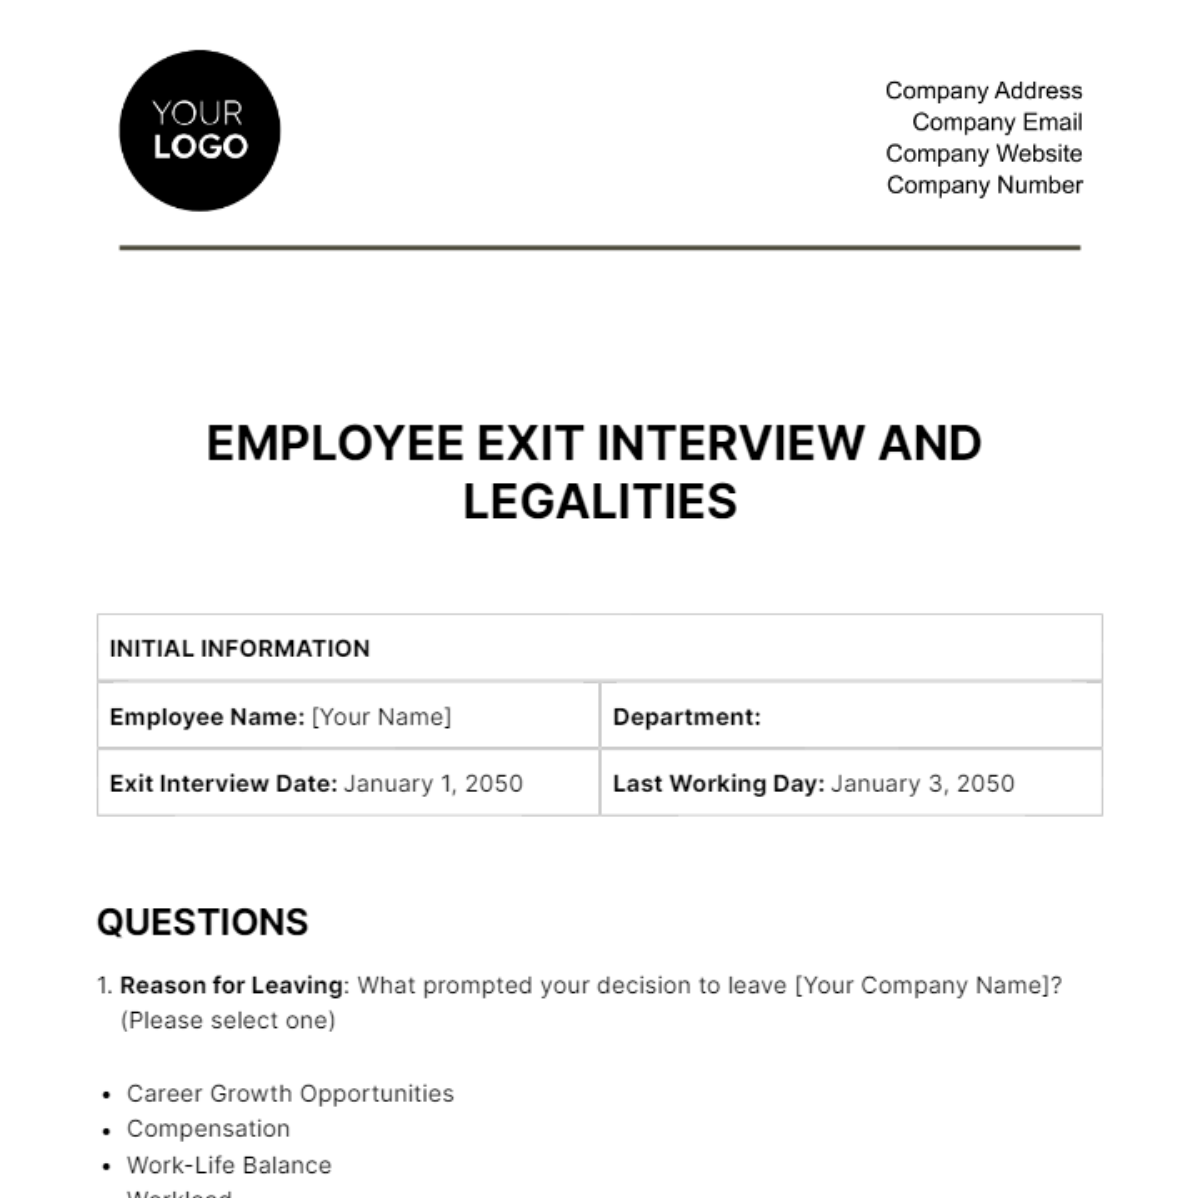 Employee Exit Interview and Legalities HR Template